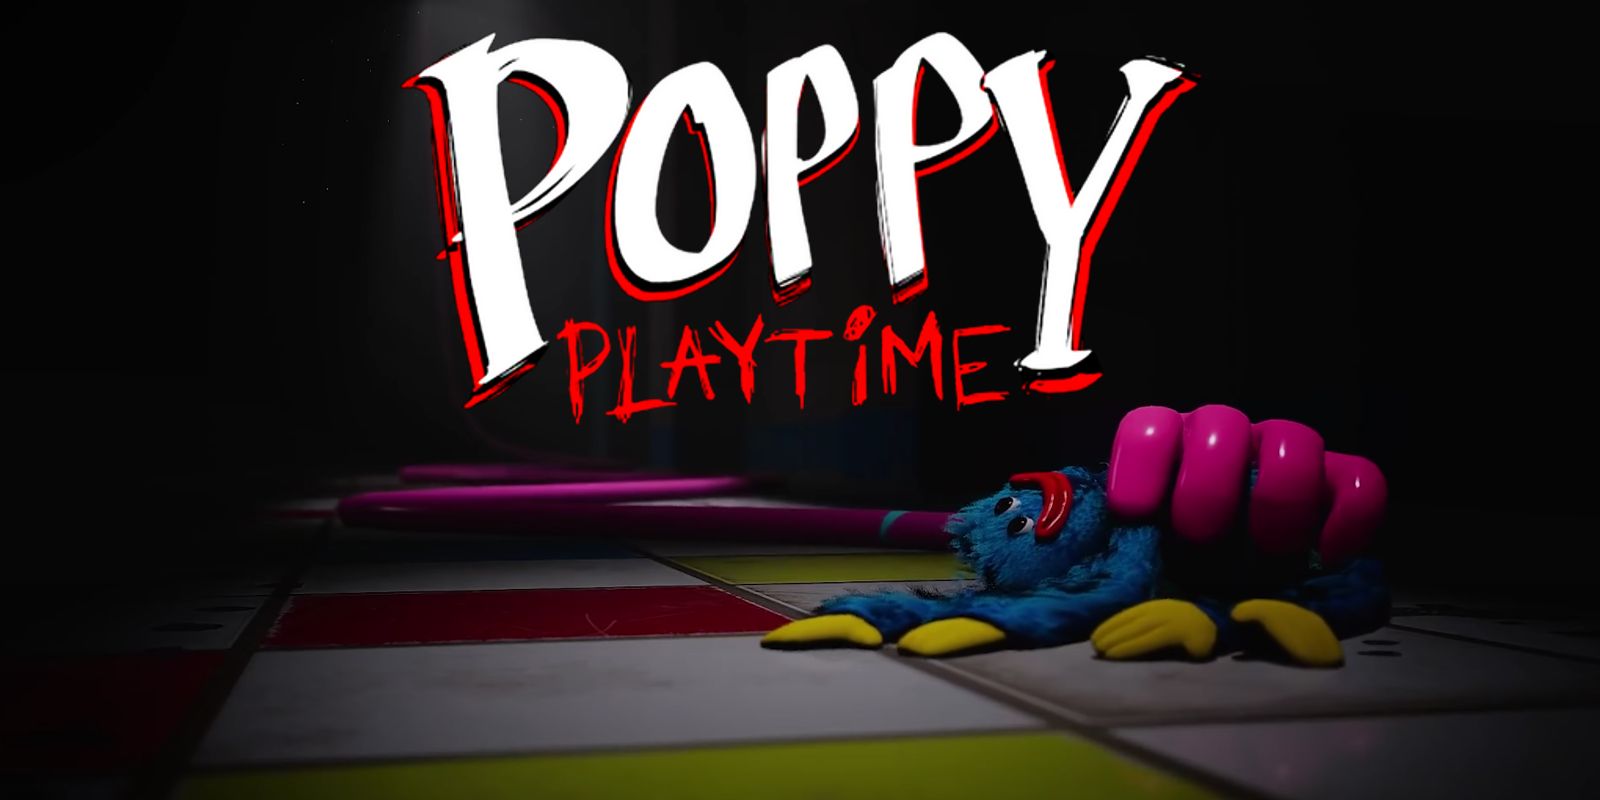 Poppy Playtime factory – lore and appearances